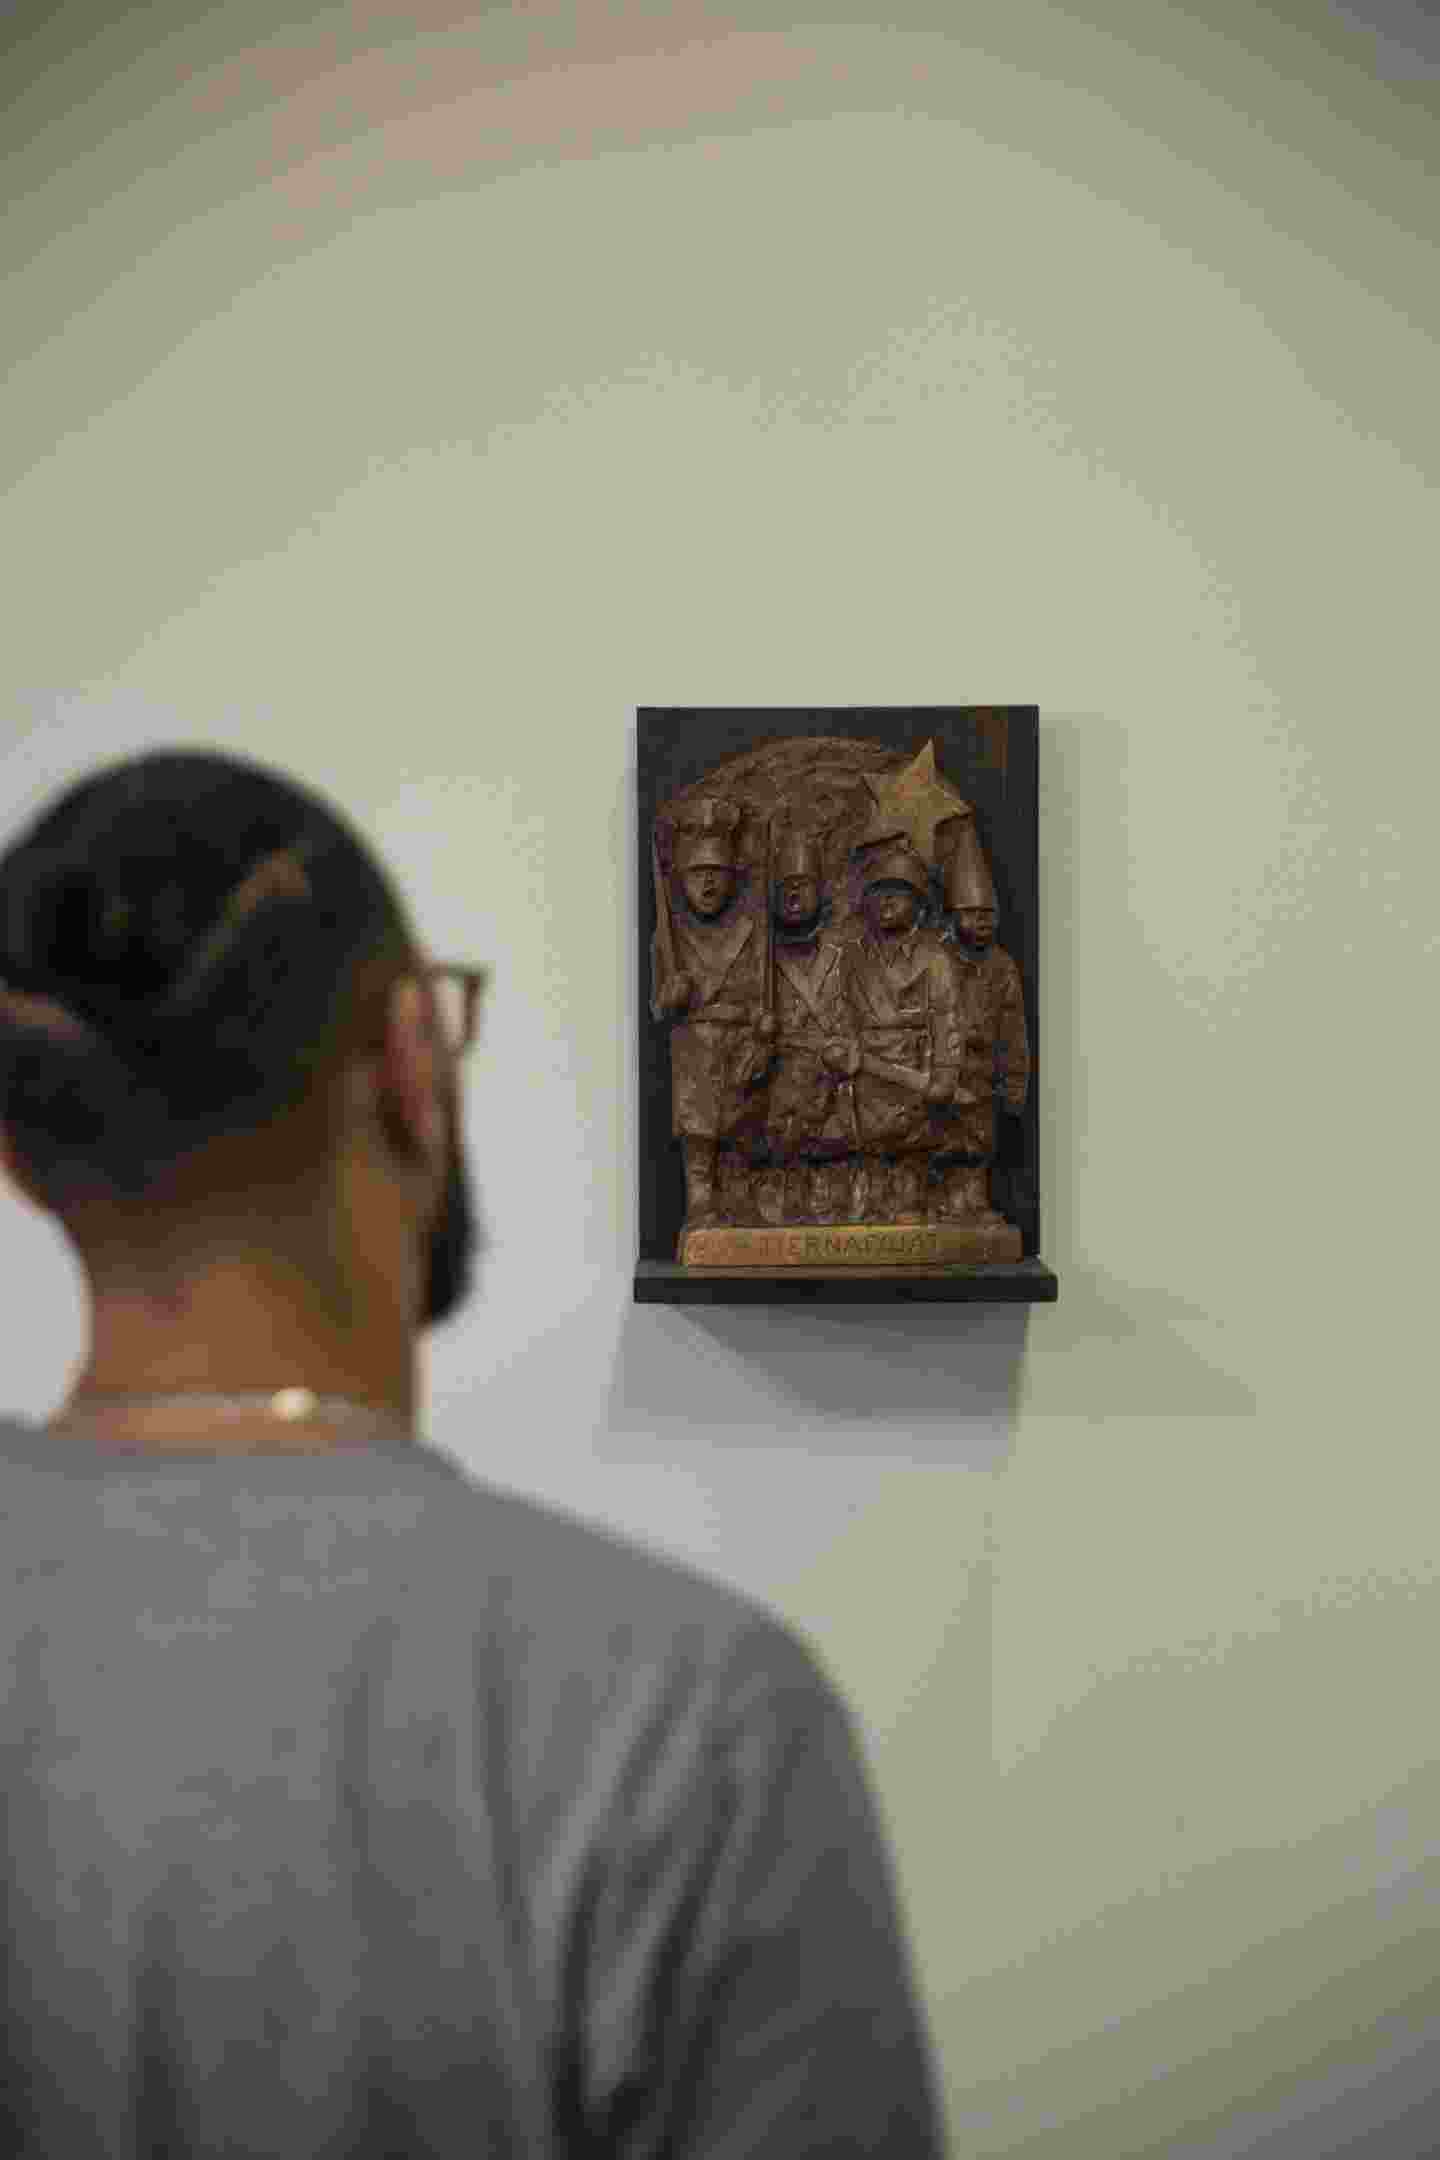 A person looking at an artwork.